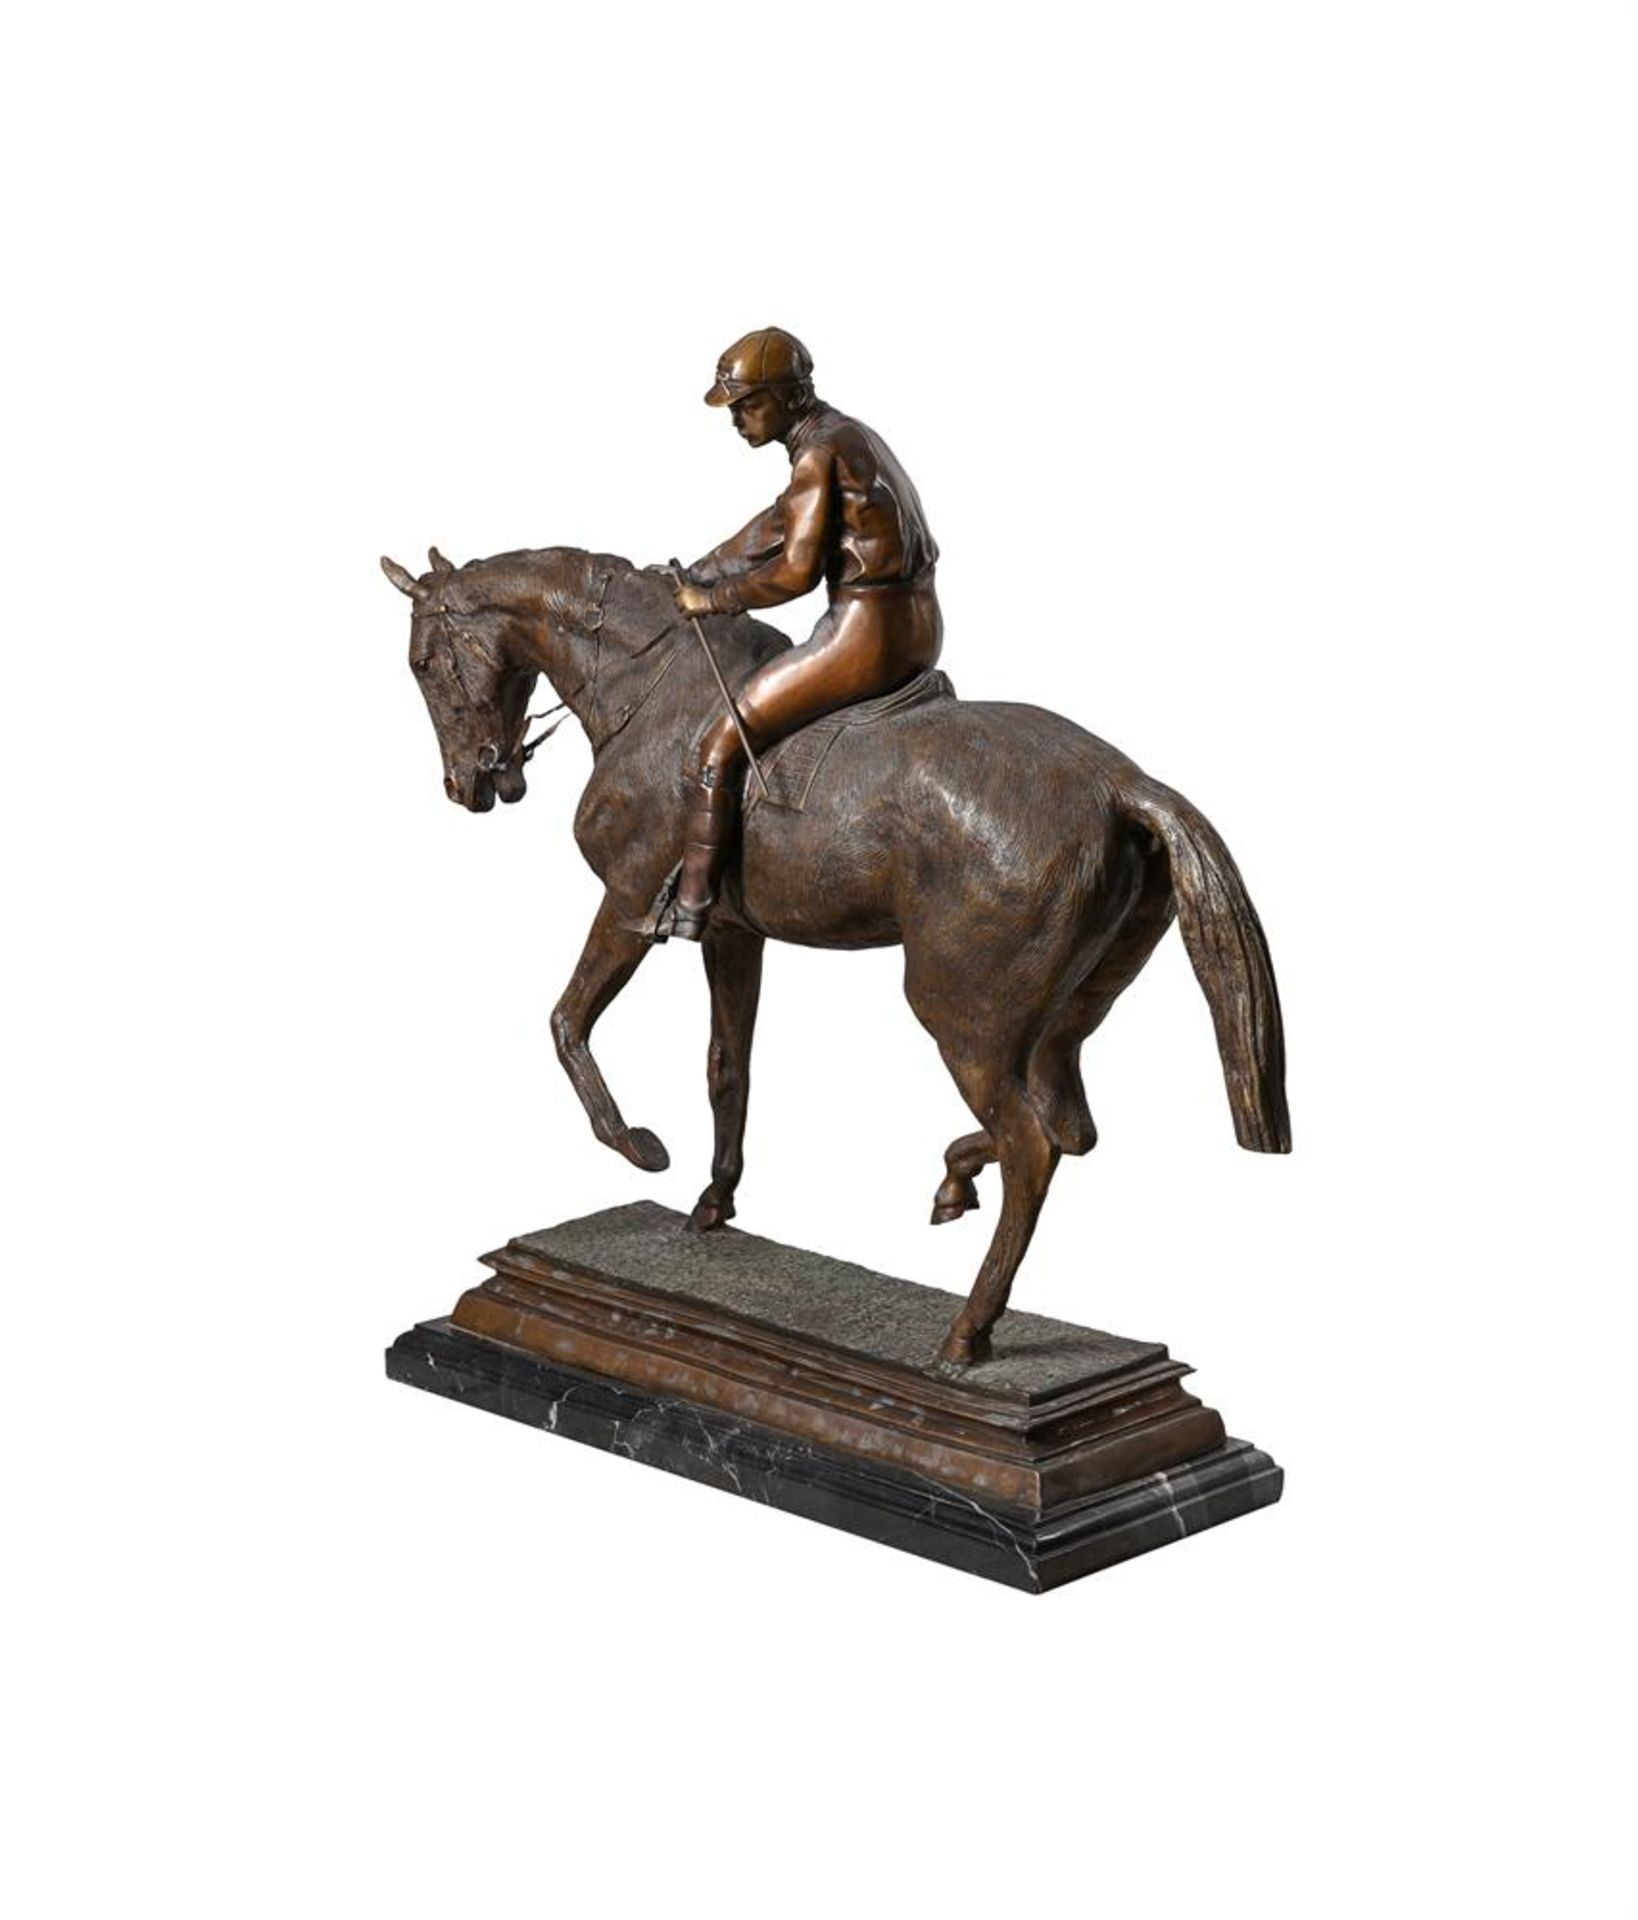 AFTER ISIDORE-JULES BONHEUR, A LARGE EQUESTRIAN BRONZE 'LE GRAND JOCKEY' - Image 3 of 4